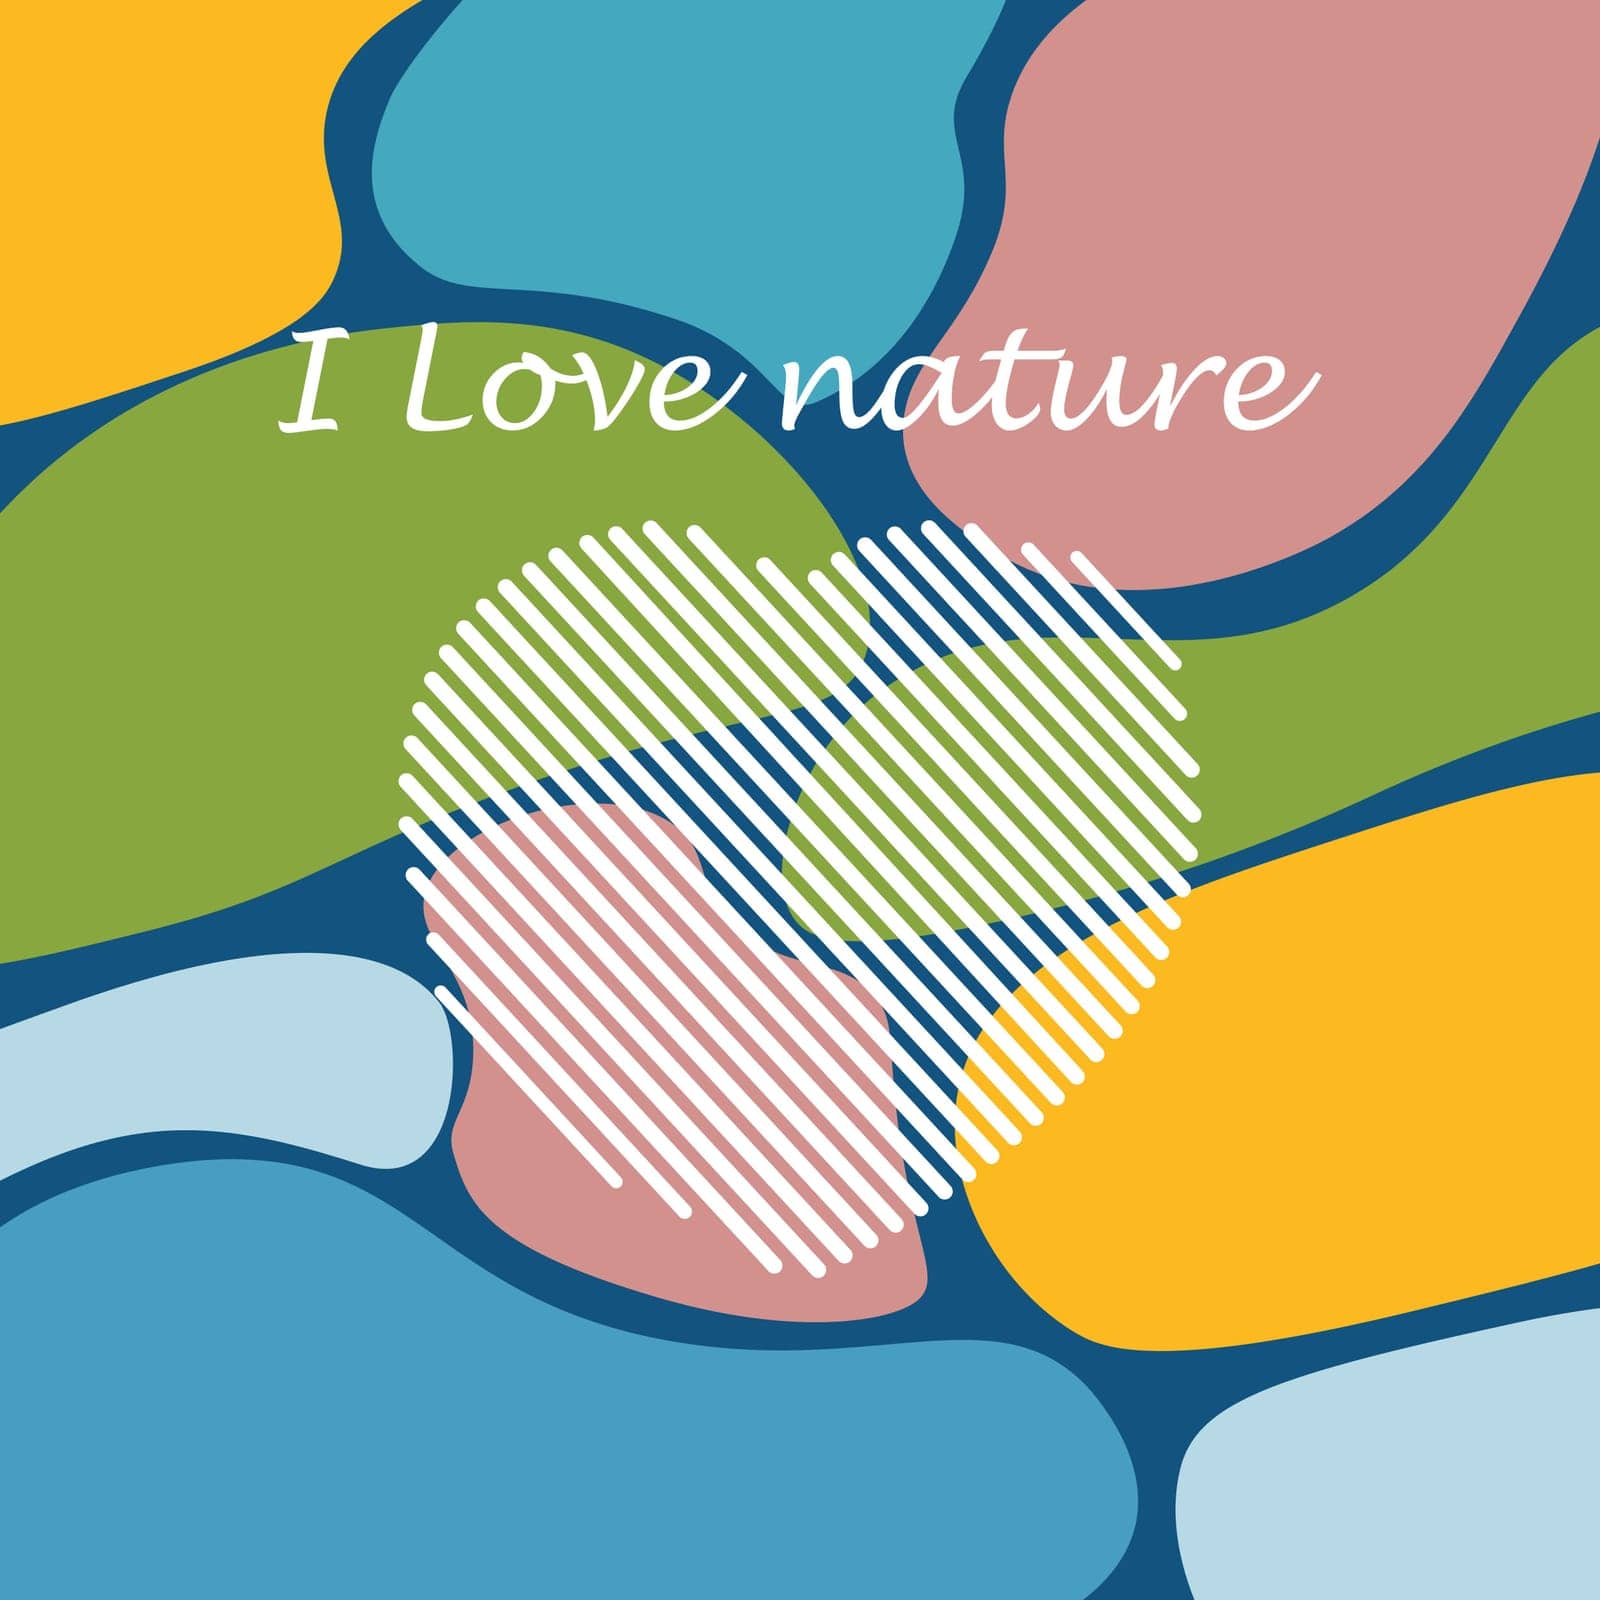 I love nature. An illustration with an image of a heart on a colored abstract background and the inscription I love nature. Vector illustration.